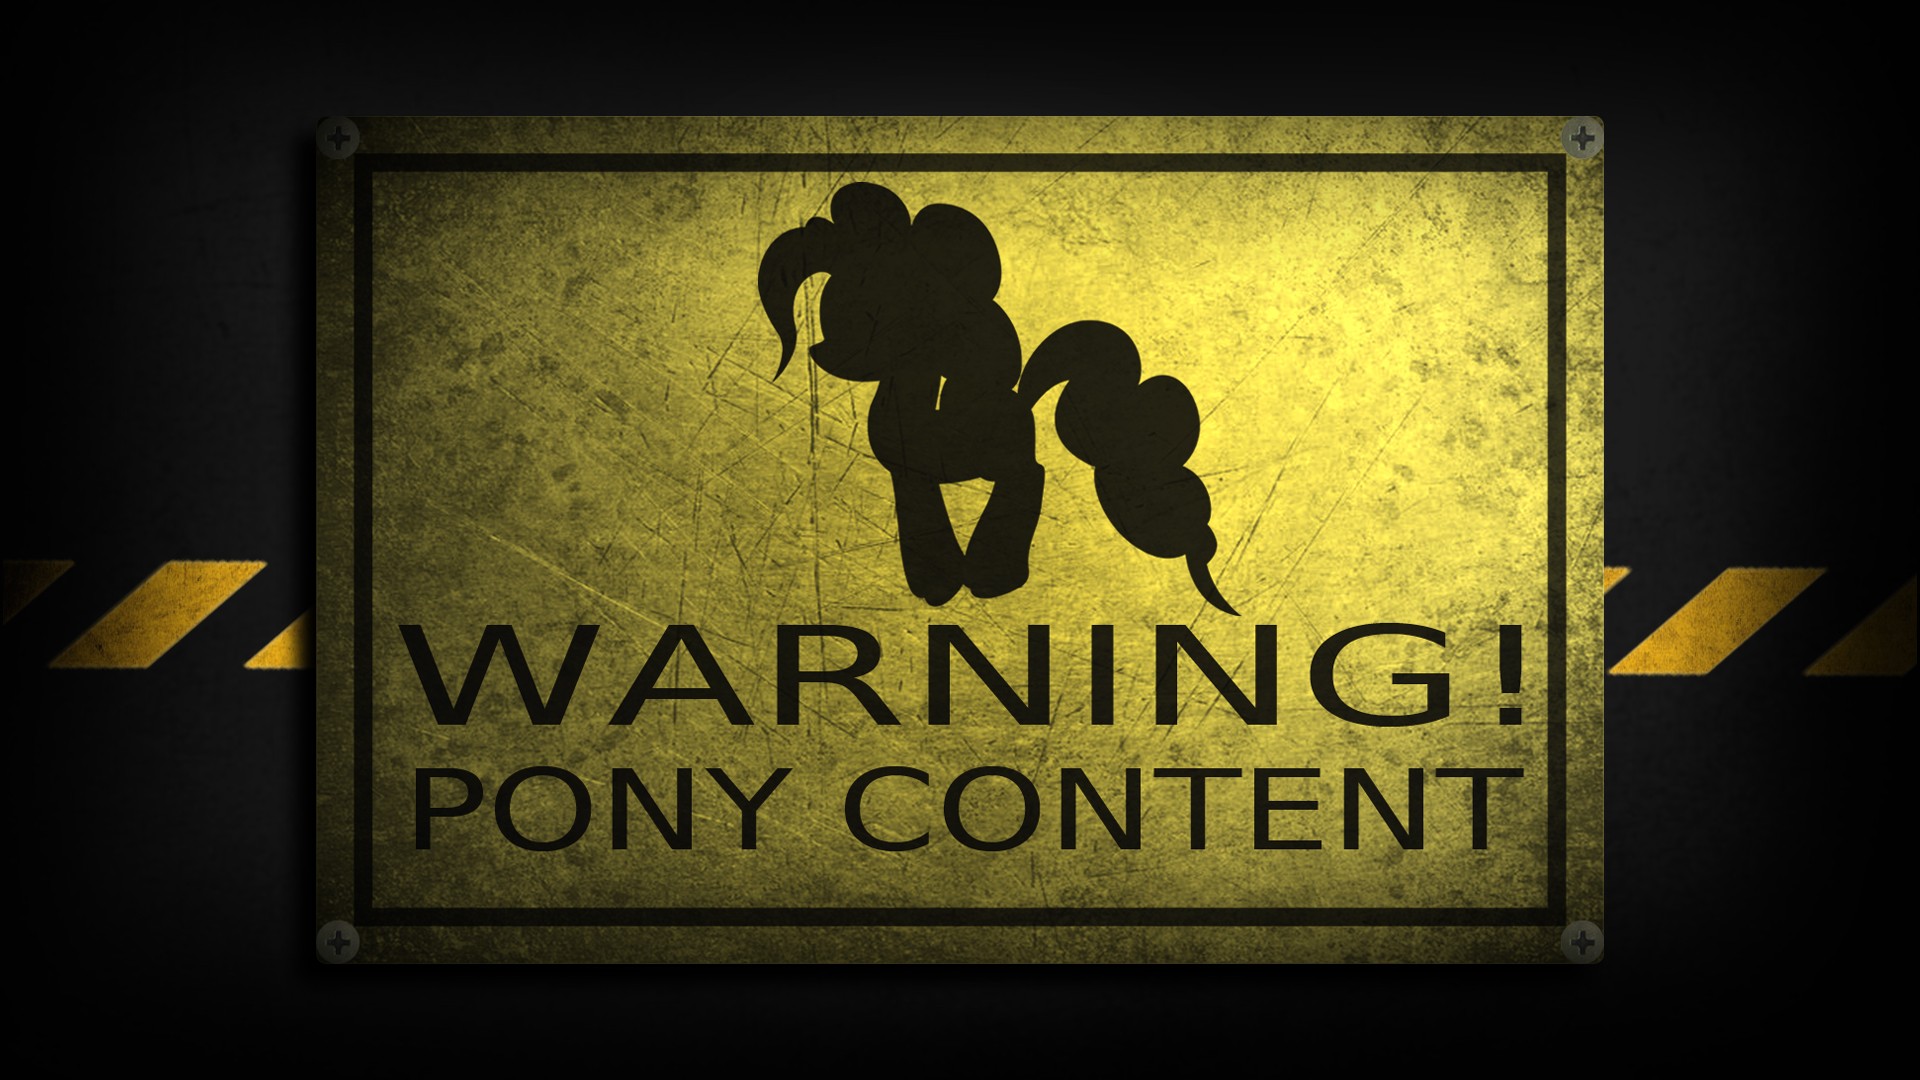 Content warning all monsters. Caution обои. Warning фон. Warning content. Forewarned фон.